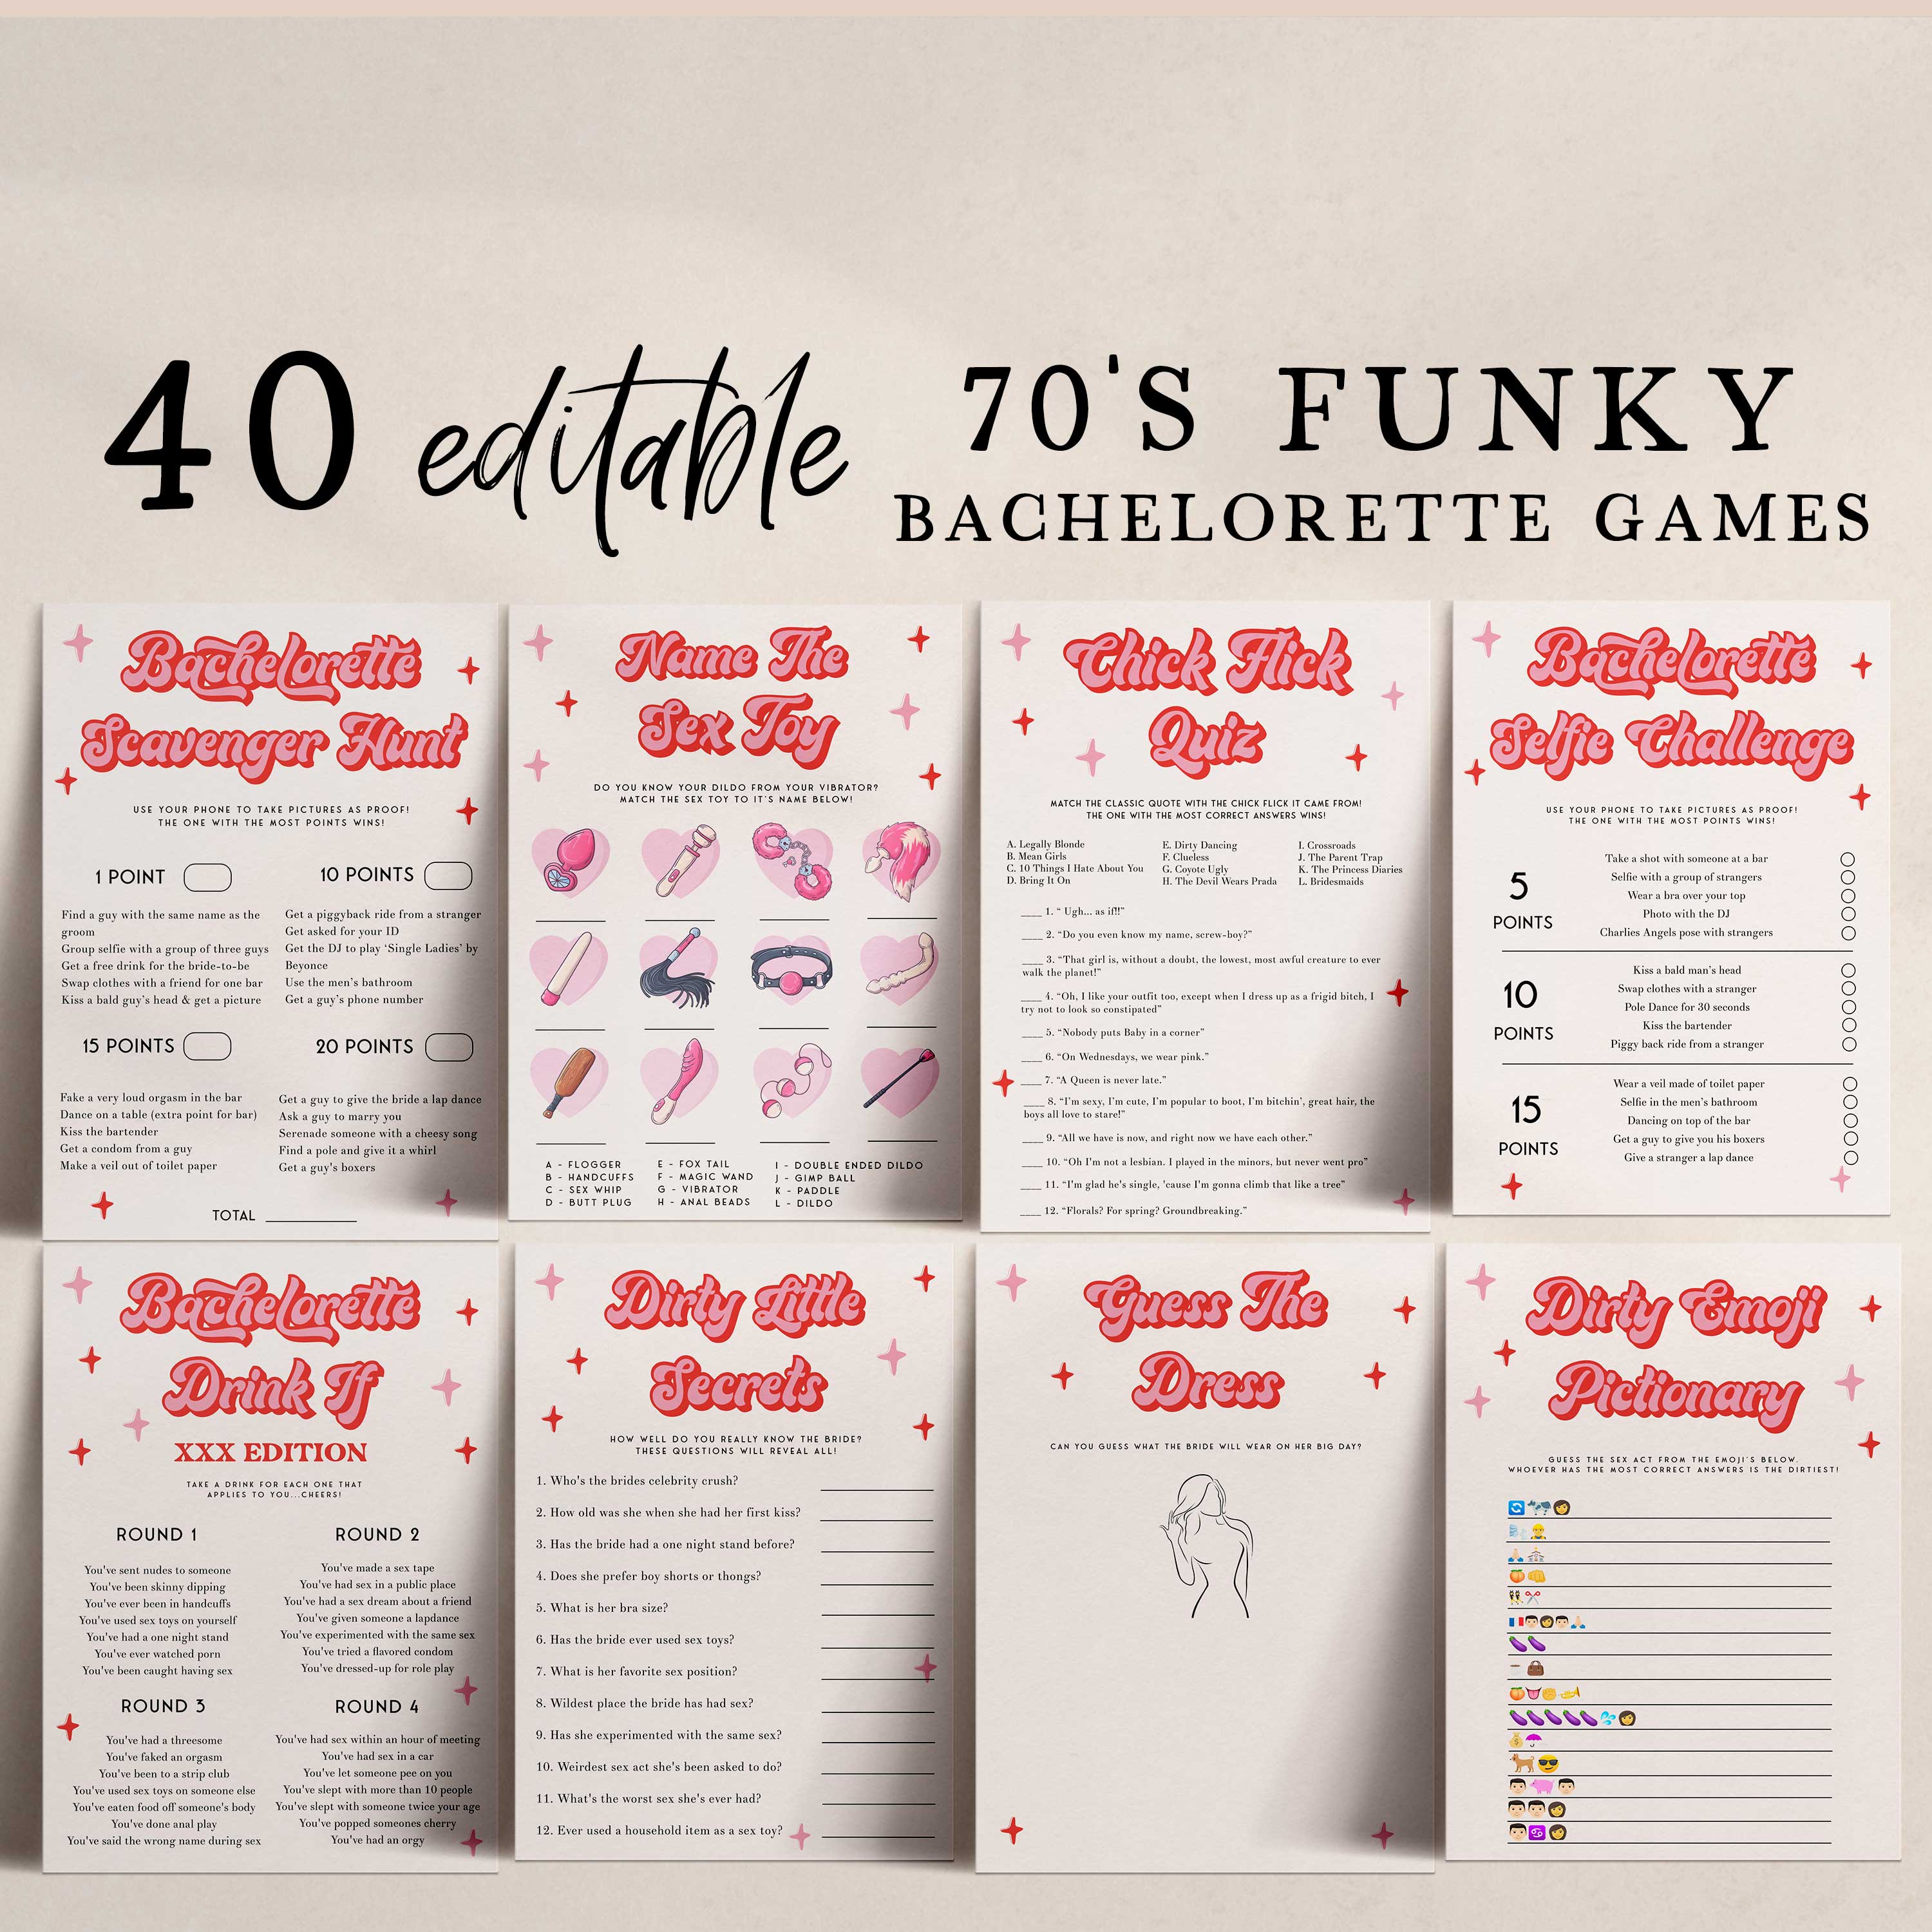 Retro 70s bachelorette party bundle including 40 editable games, invitations, and welcome signs